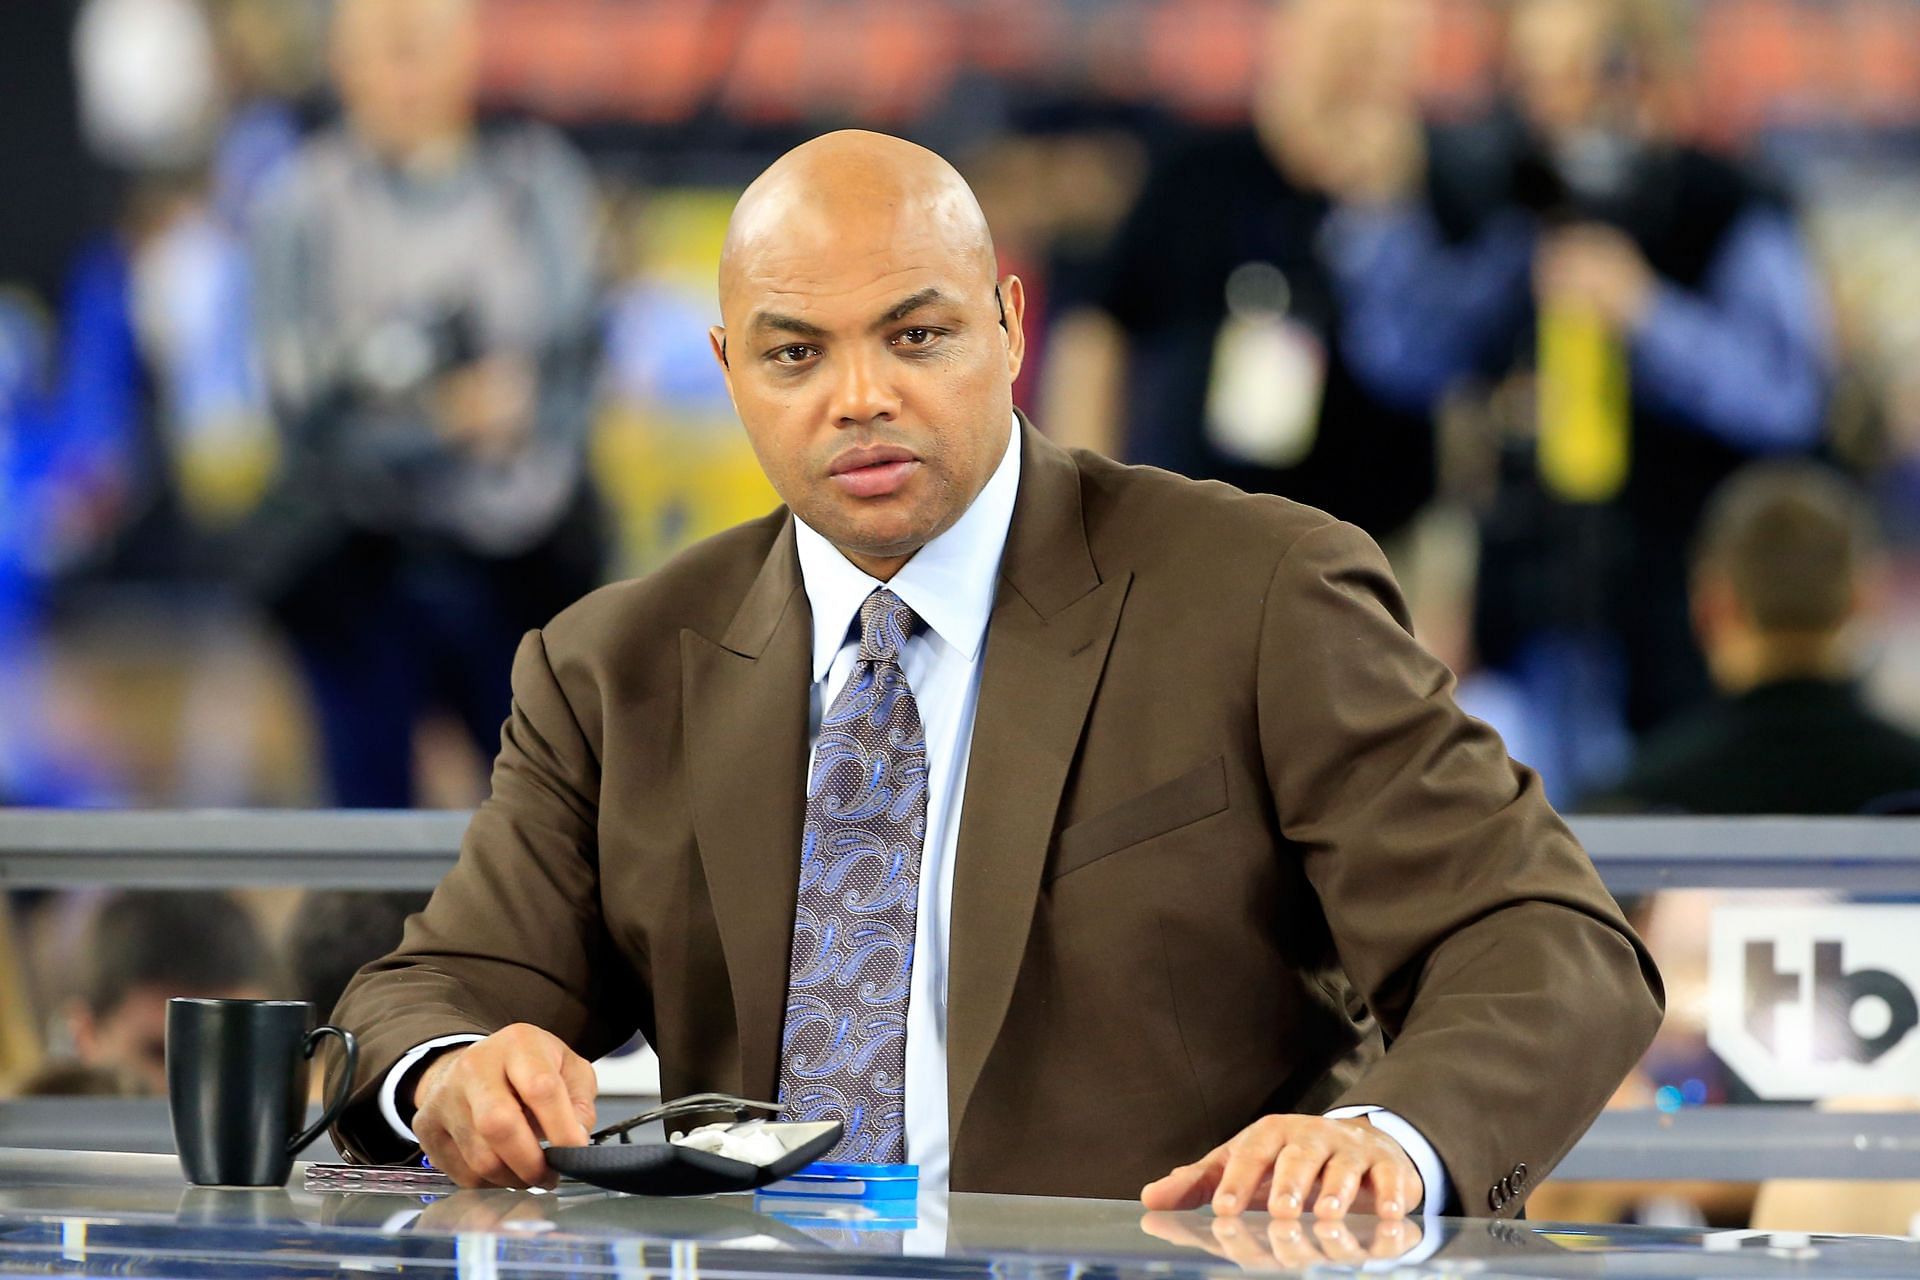 Charles Barkley on &quot;Inside the NBA&quot; on TNT